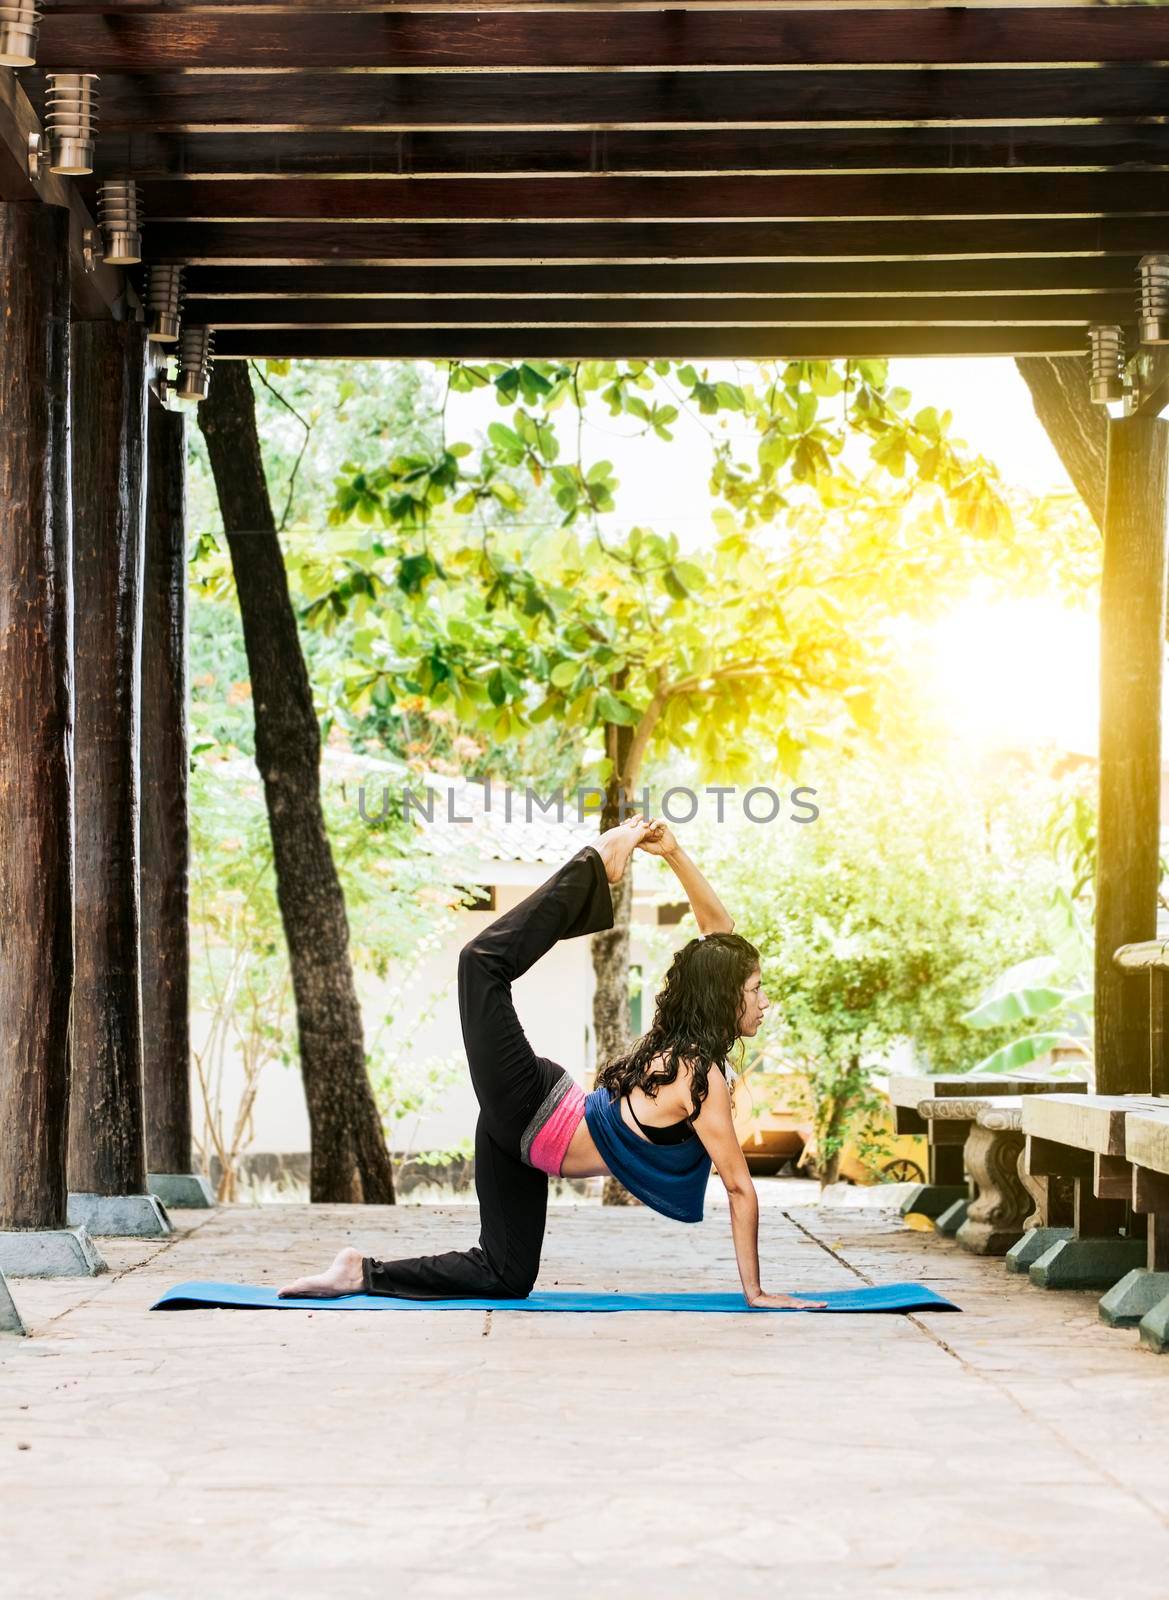 Woman doing quadriceps yoga outdoors, girl doing yoga and quadricep stretching fitness